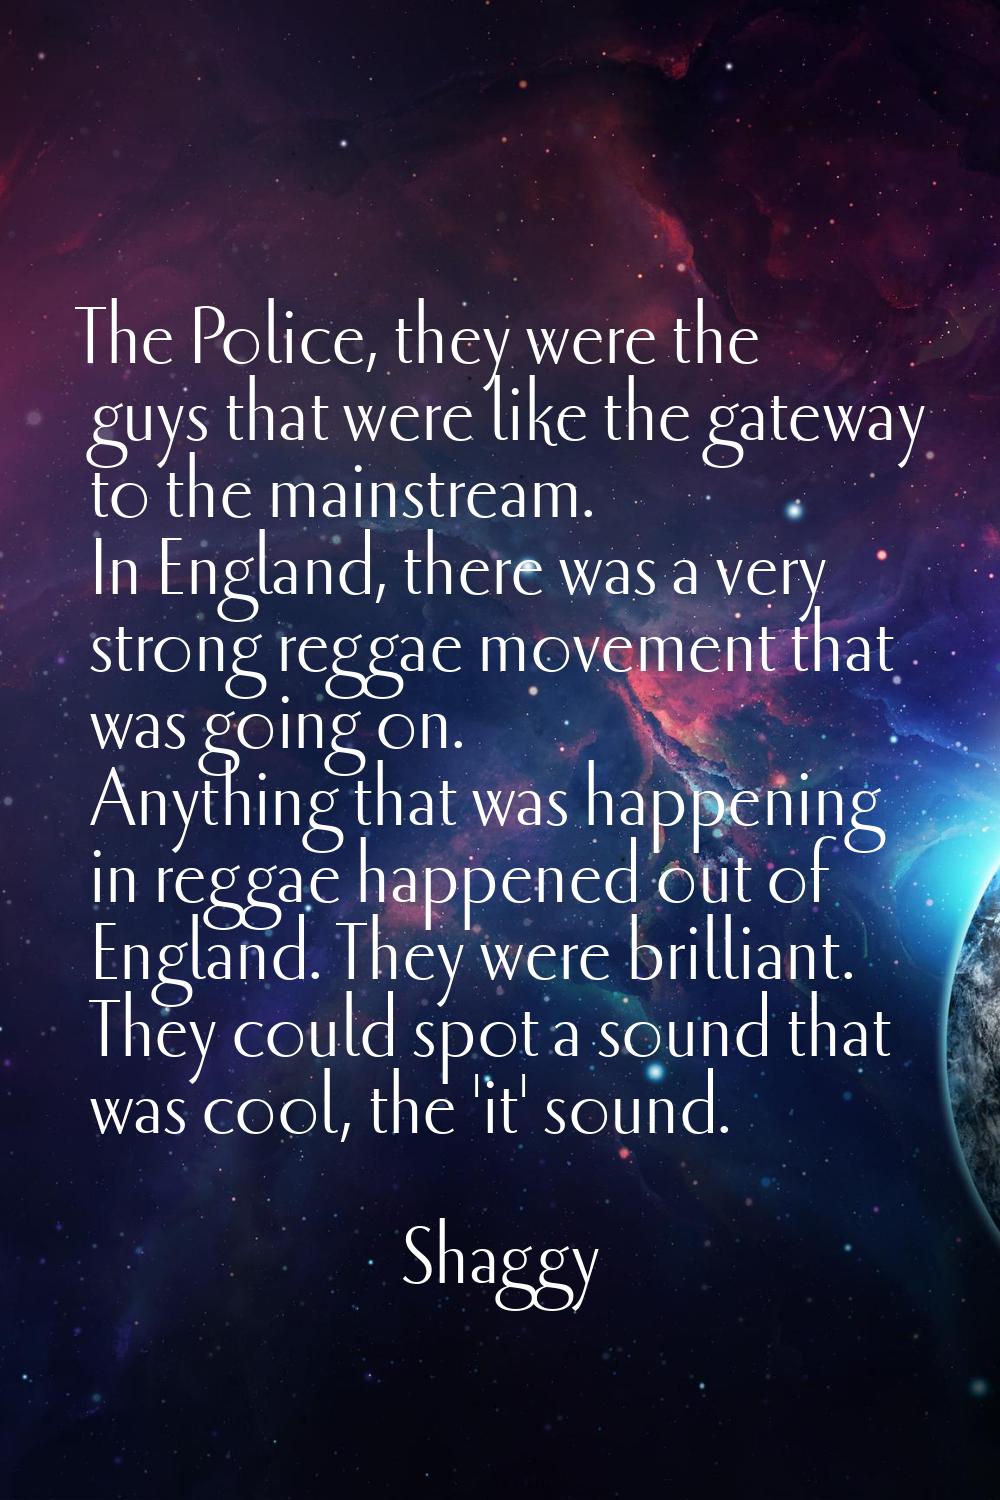 The Police, they were the guys that were like the gateway to the mainstream. In England, there was 